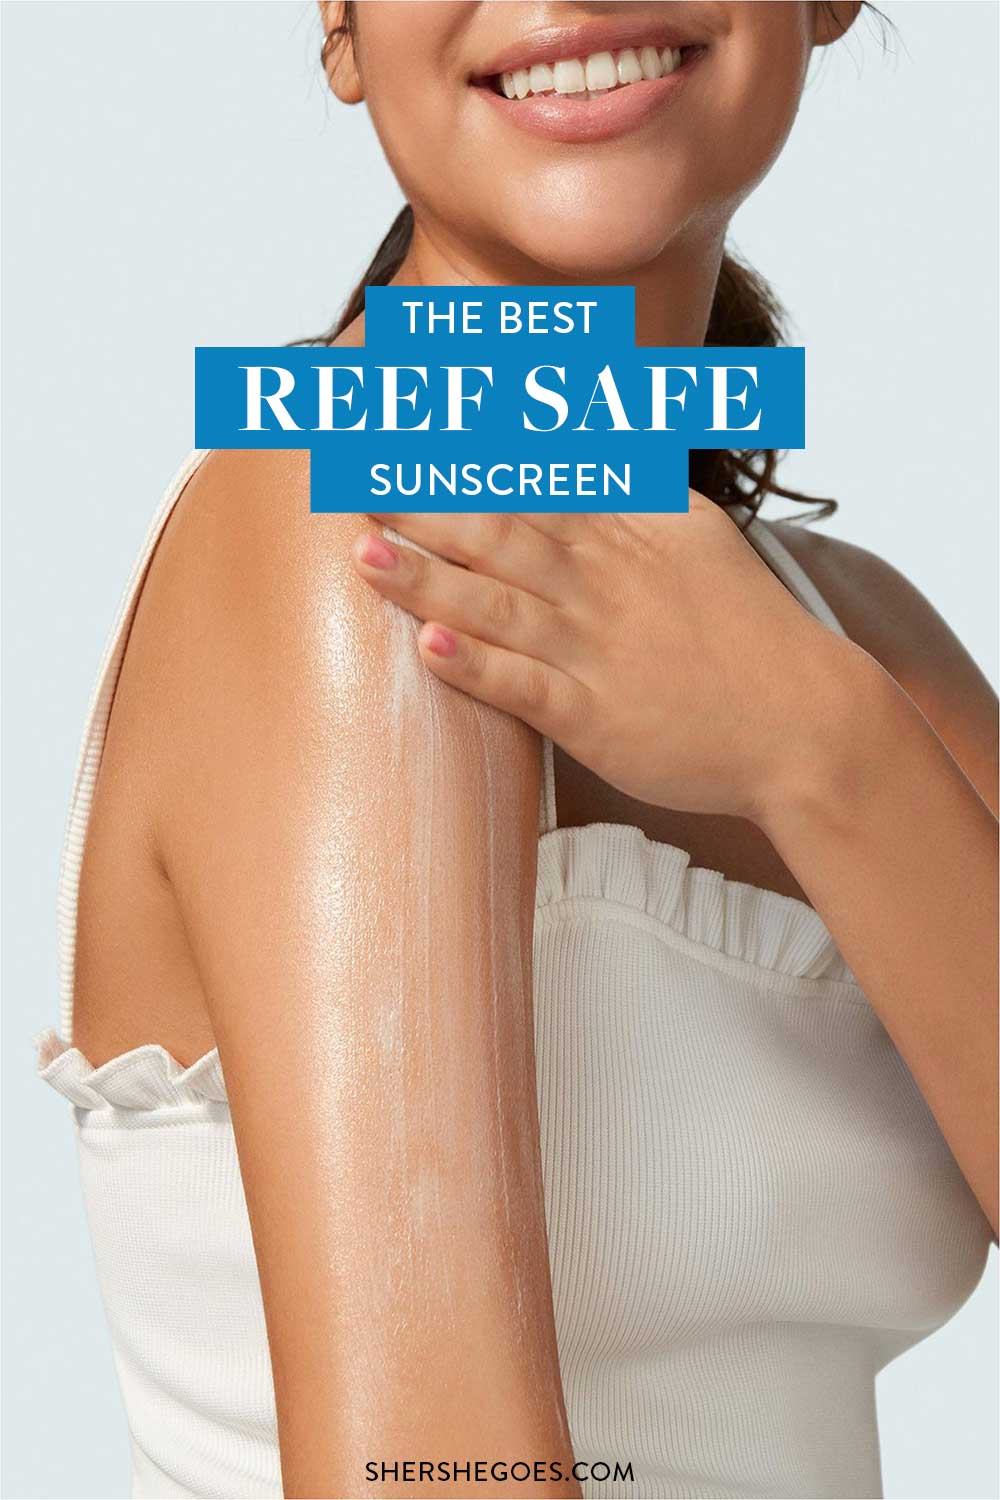 coral-reef-safe-sunscreen